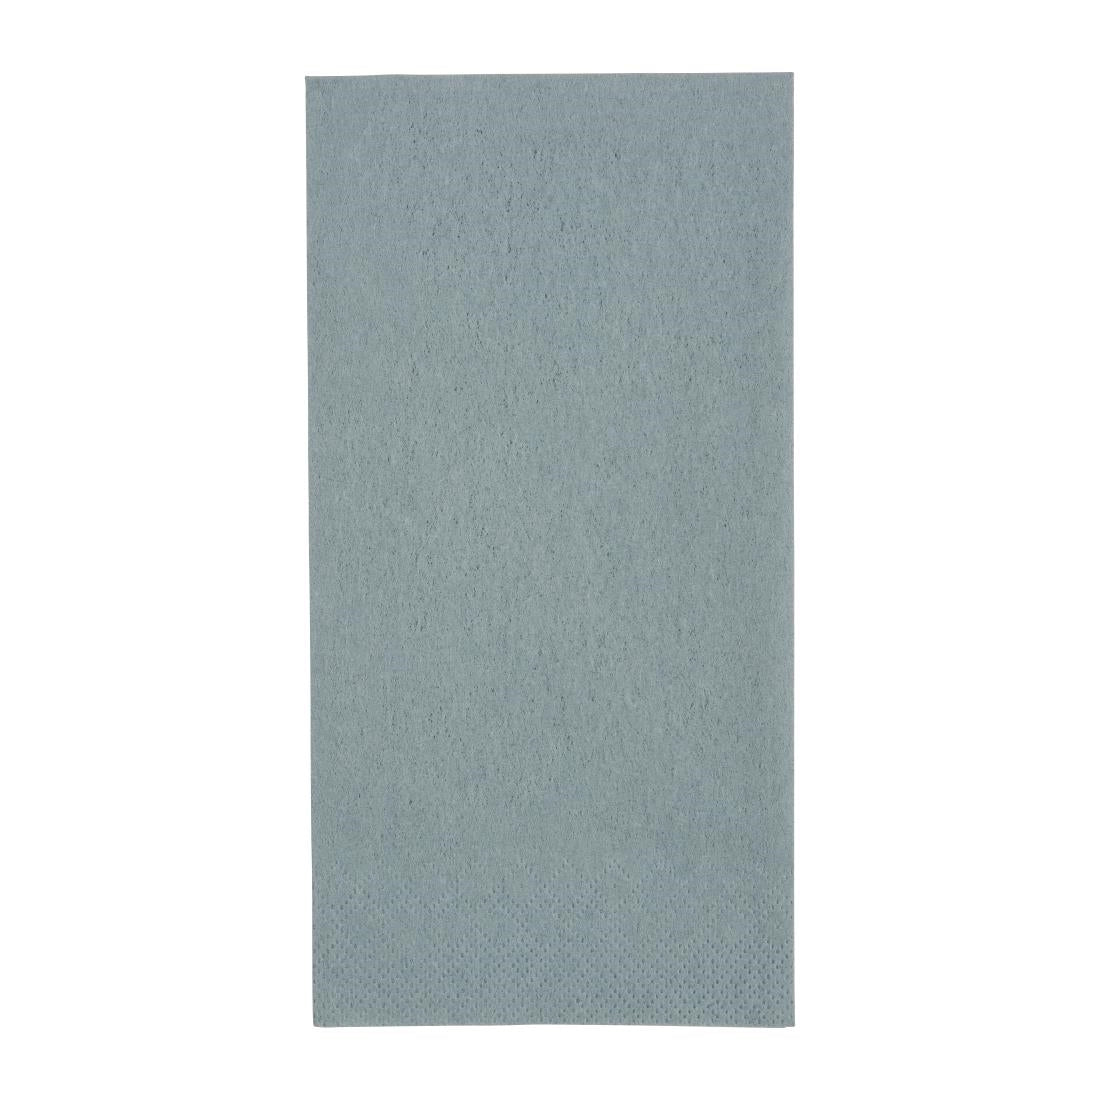 FE260 Fiesta Recyclable Dinner Napkin Grey 40x40cm 3ply 1/8 Fold (Pack of 1000) JD Catering Equipment Solutions Ltd